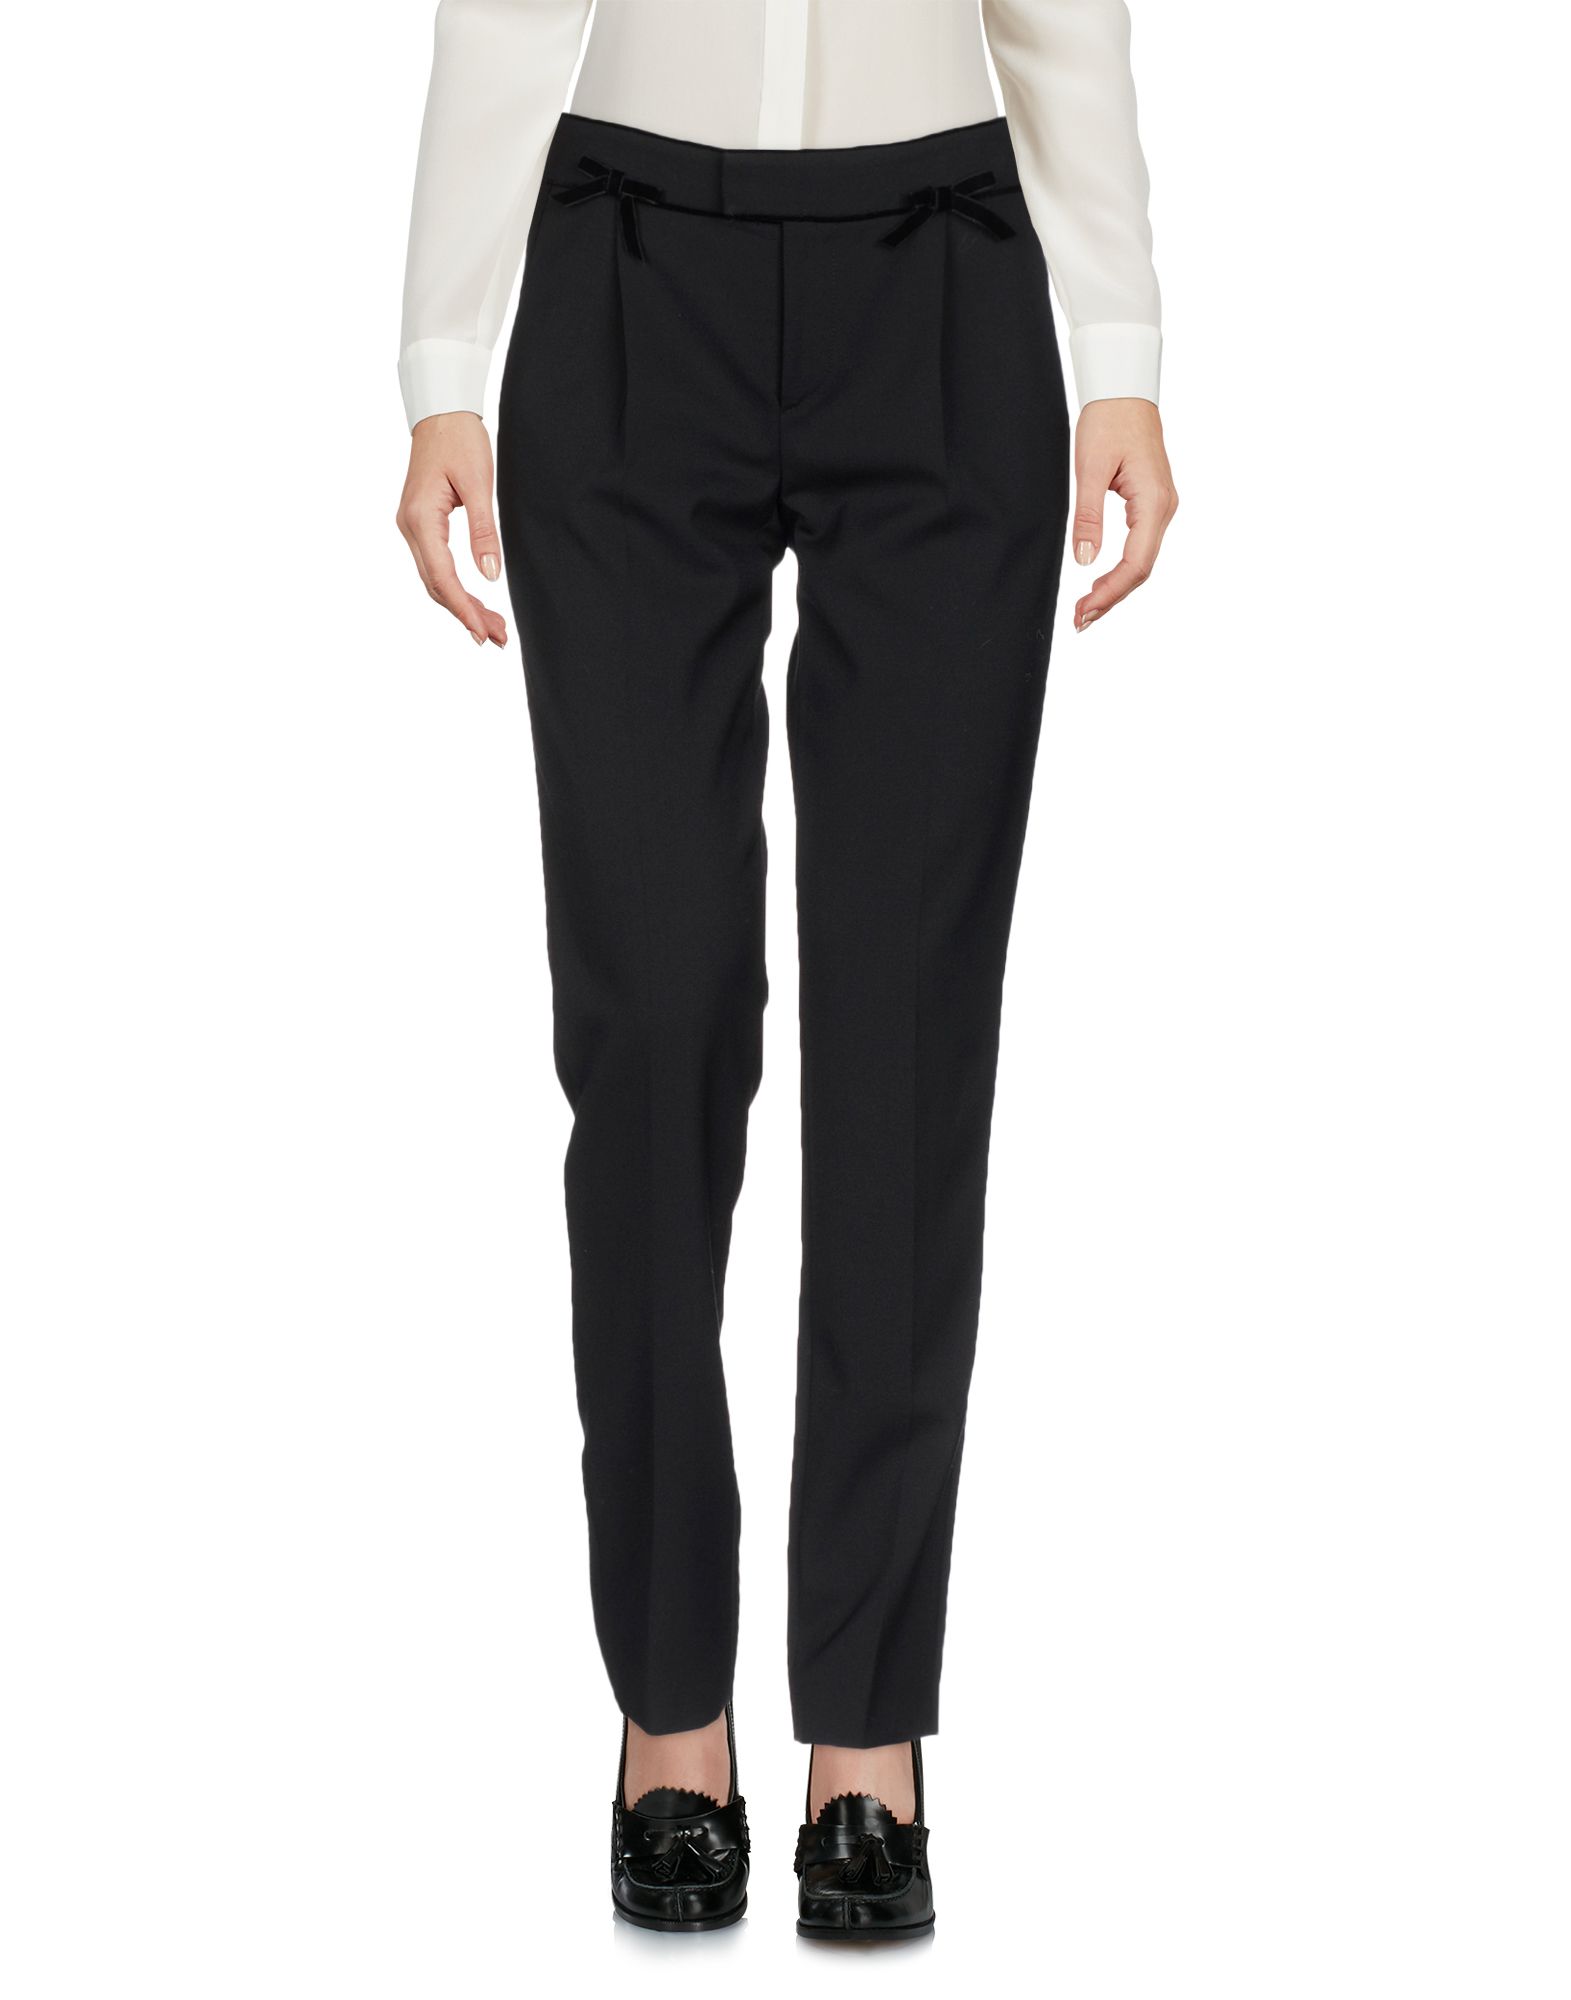 RED VALENTINO Casual pants,13166928GR 3